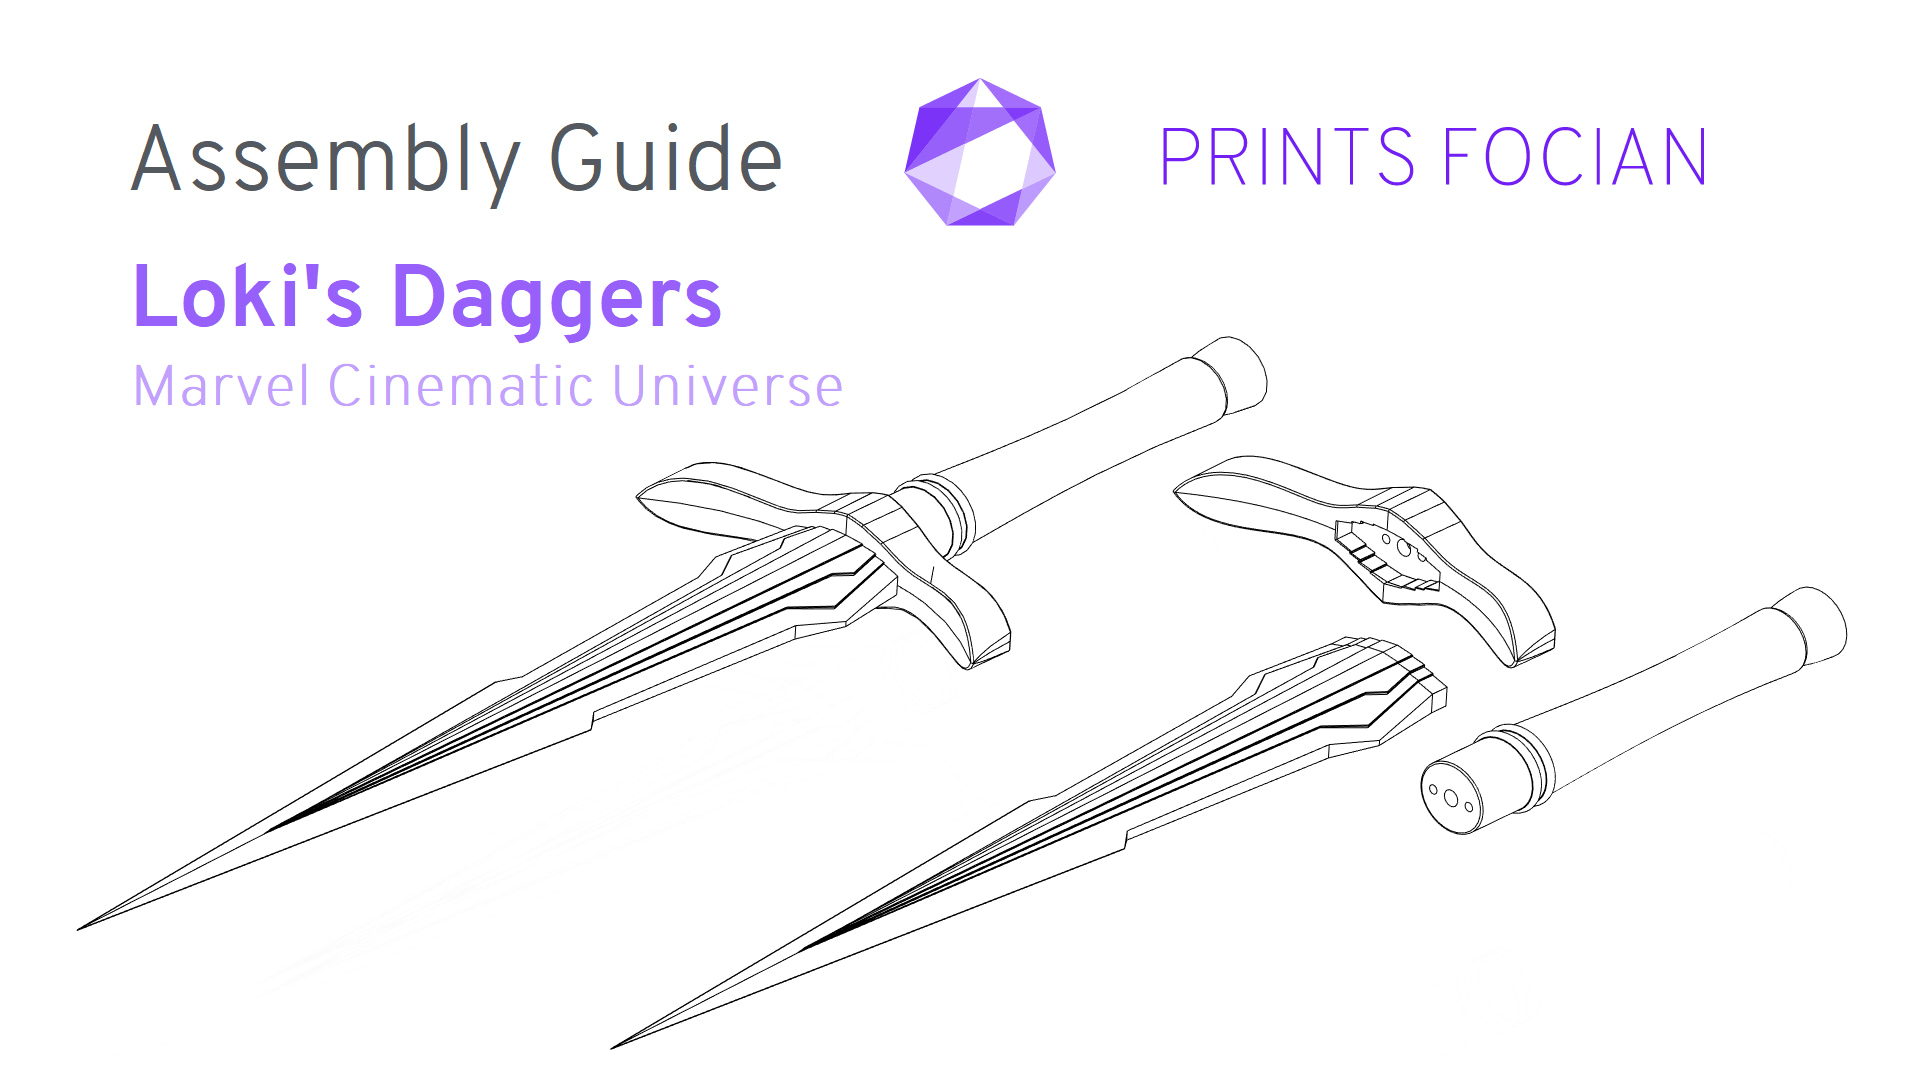 Wireframe exploded image of the Loki's Daggers on a white background. Prints Focian Icon top and central. Text: Purple Prints Focian, Loki's Daggers, Marvel Cinimatic Universe MCU and dark grey Assembly Guide